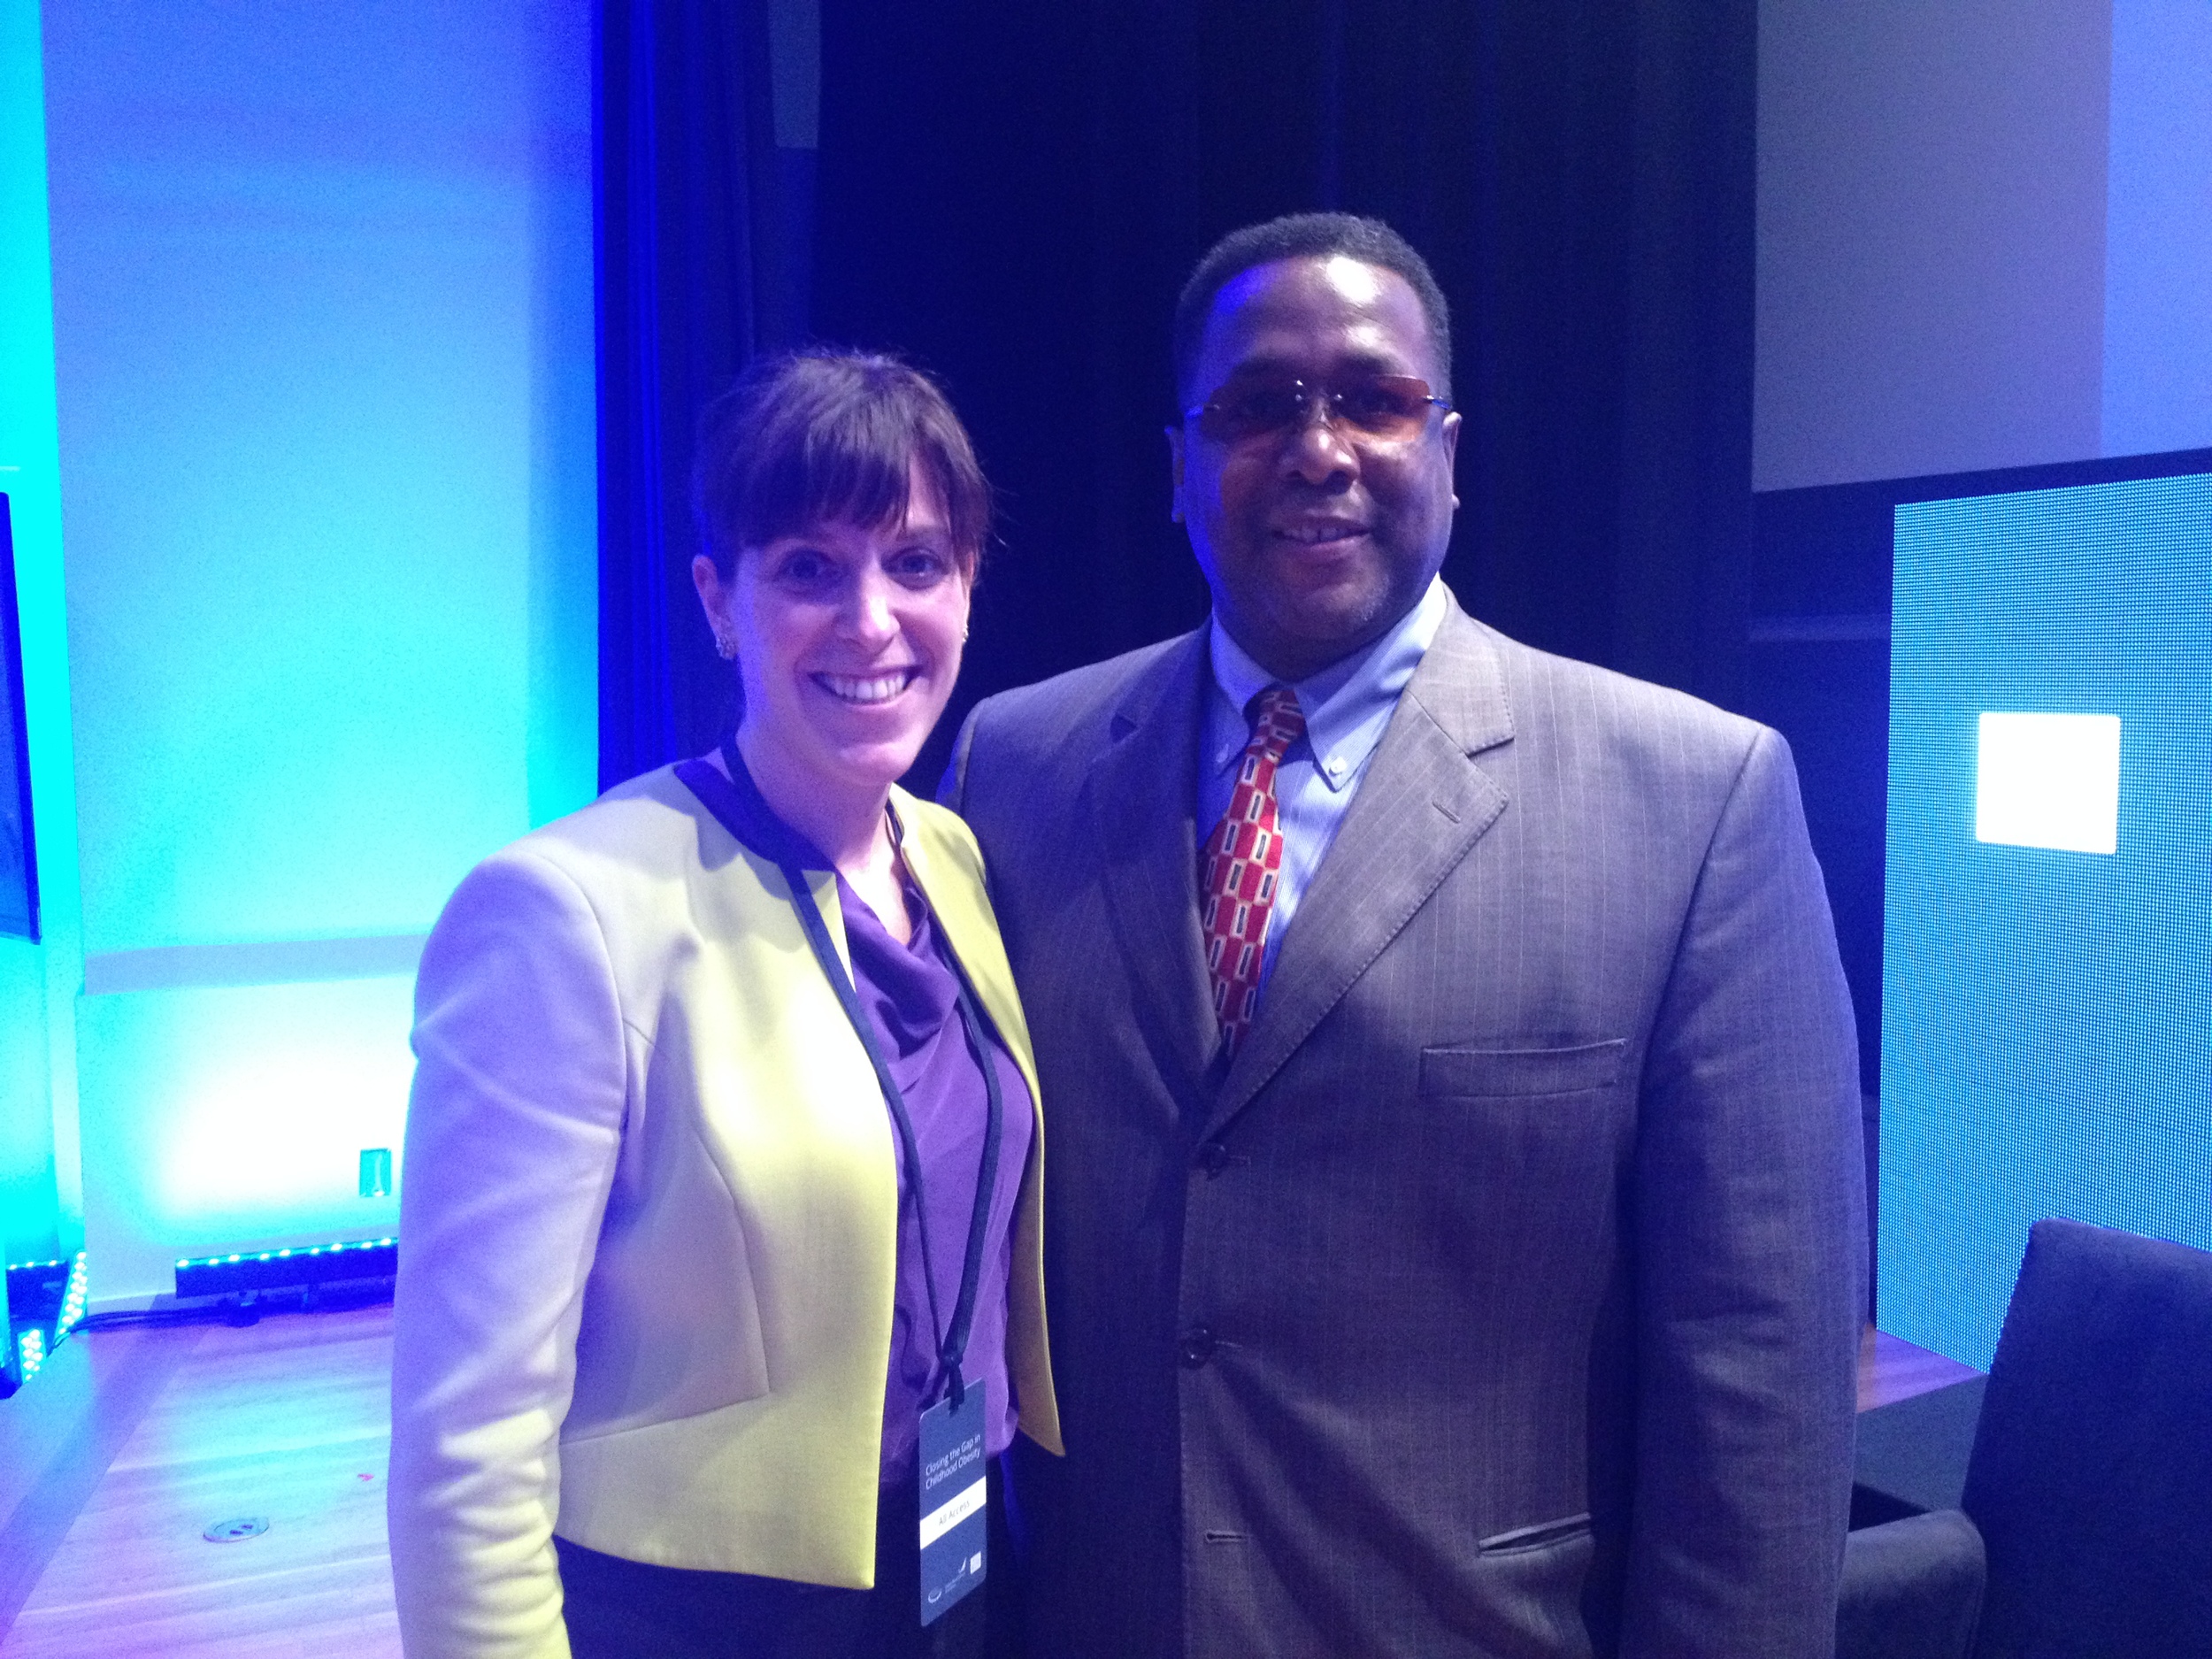 Jess standing with Wendell Pierce, Actor and President of Sterling Farms- working to bring healthy foods to food deserts within New Orleans.